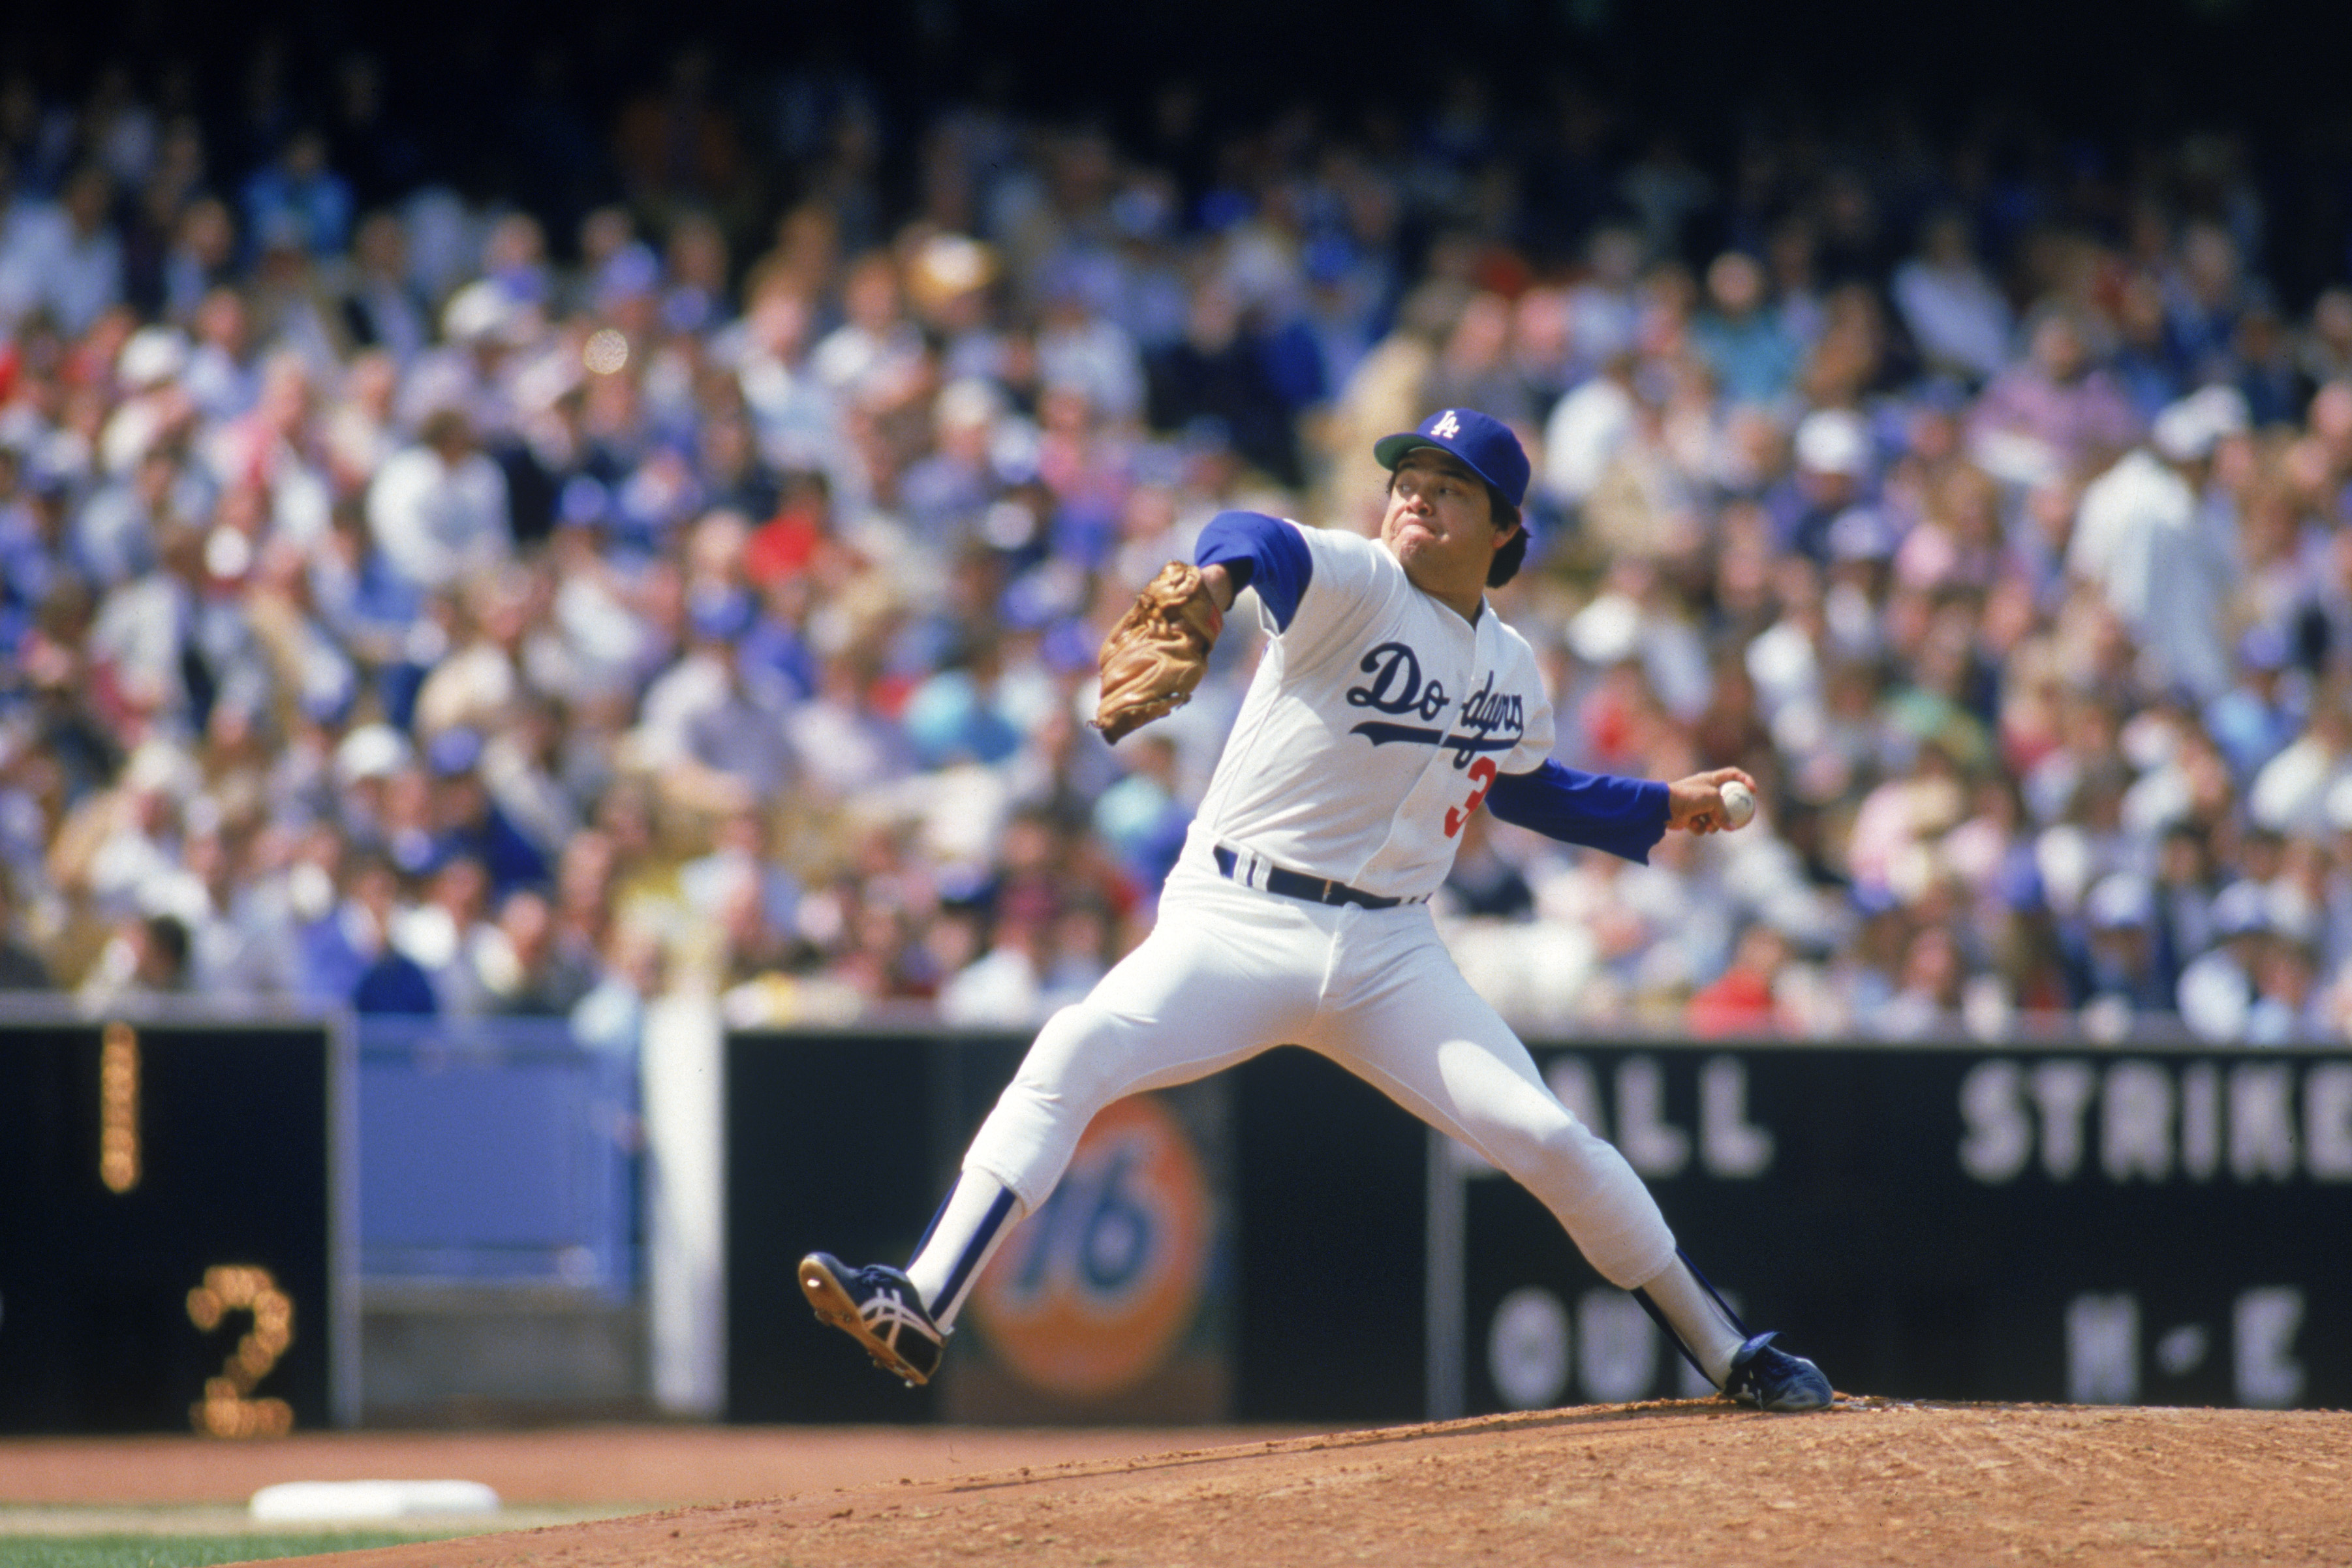 LOS ANGELES - 1985: Pitcher Fernando Valenzuela #34 of the Los Angeles Dodgers winds up for a pitch during a 1985 MLB season game at Dodger Stadium in Los Angeles, California. (Photo by: Rick Stewart/Getty Images)